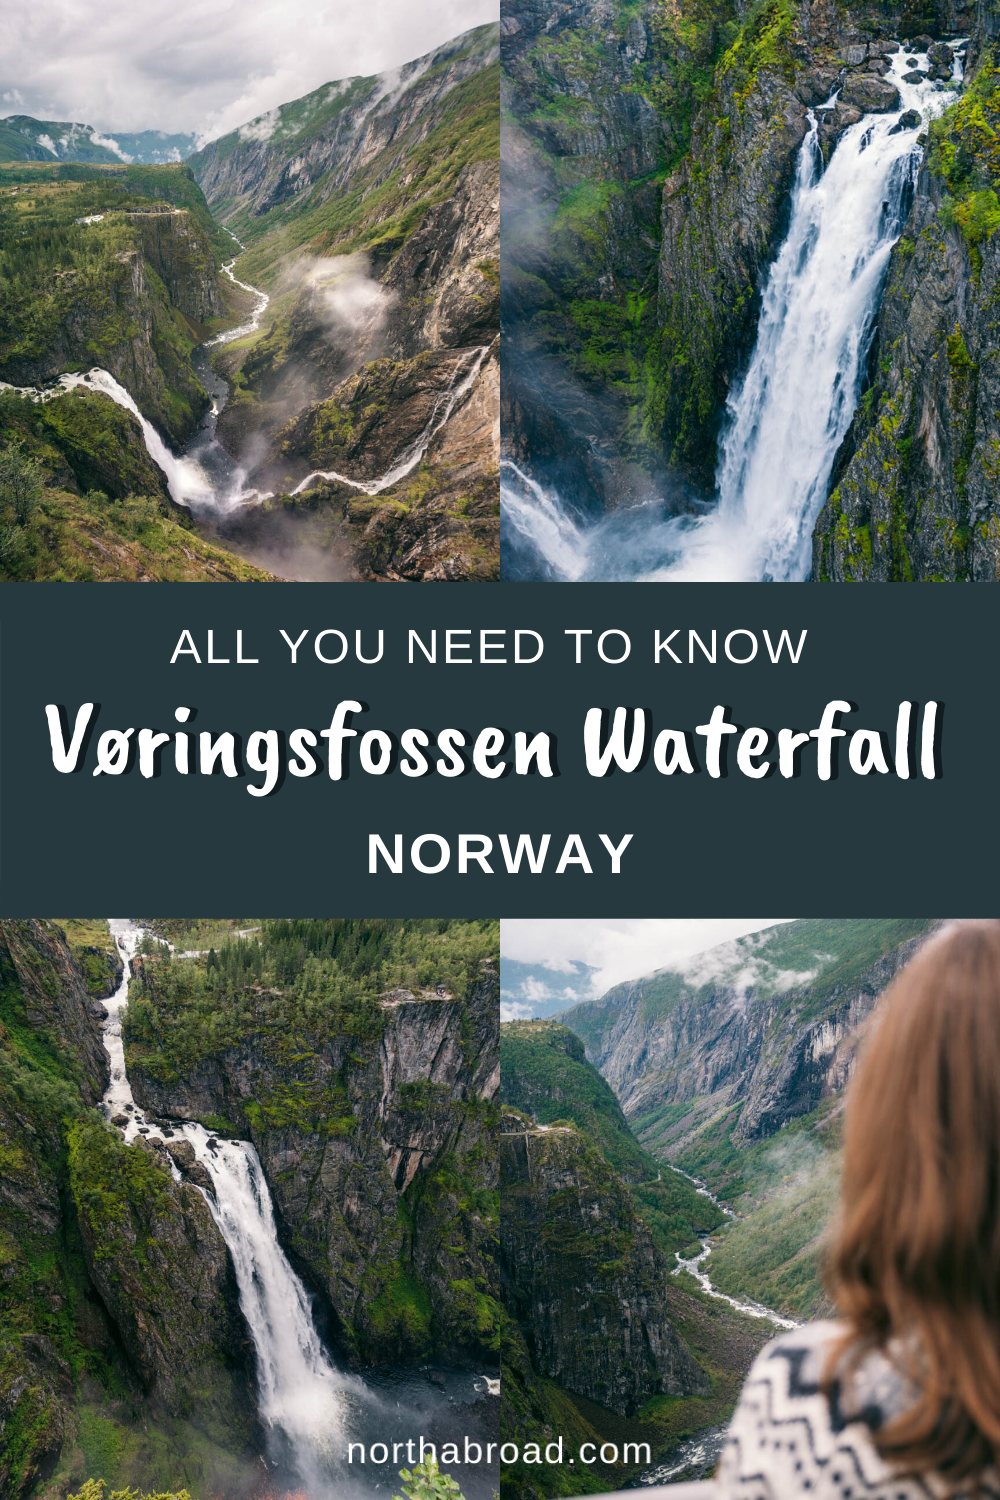 Vøringsfossen Waterfall in Norway: All You Need to Know